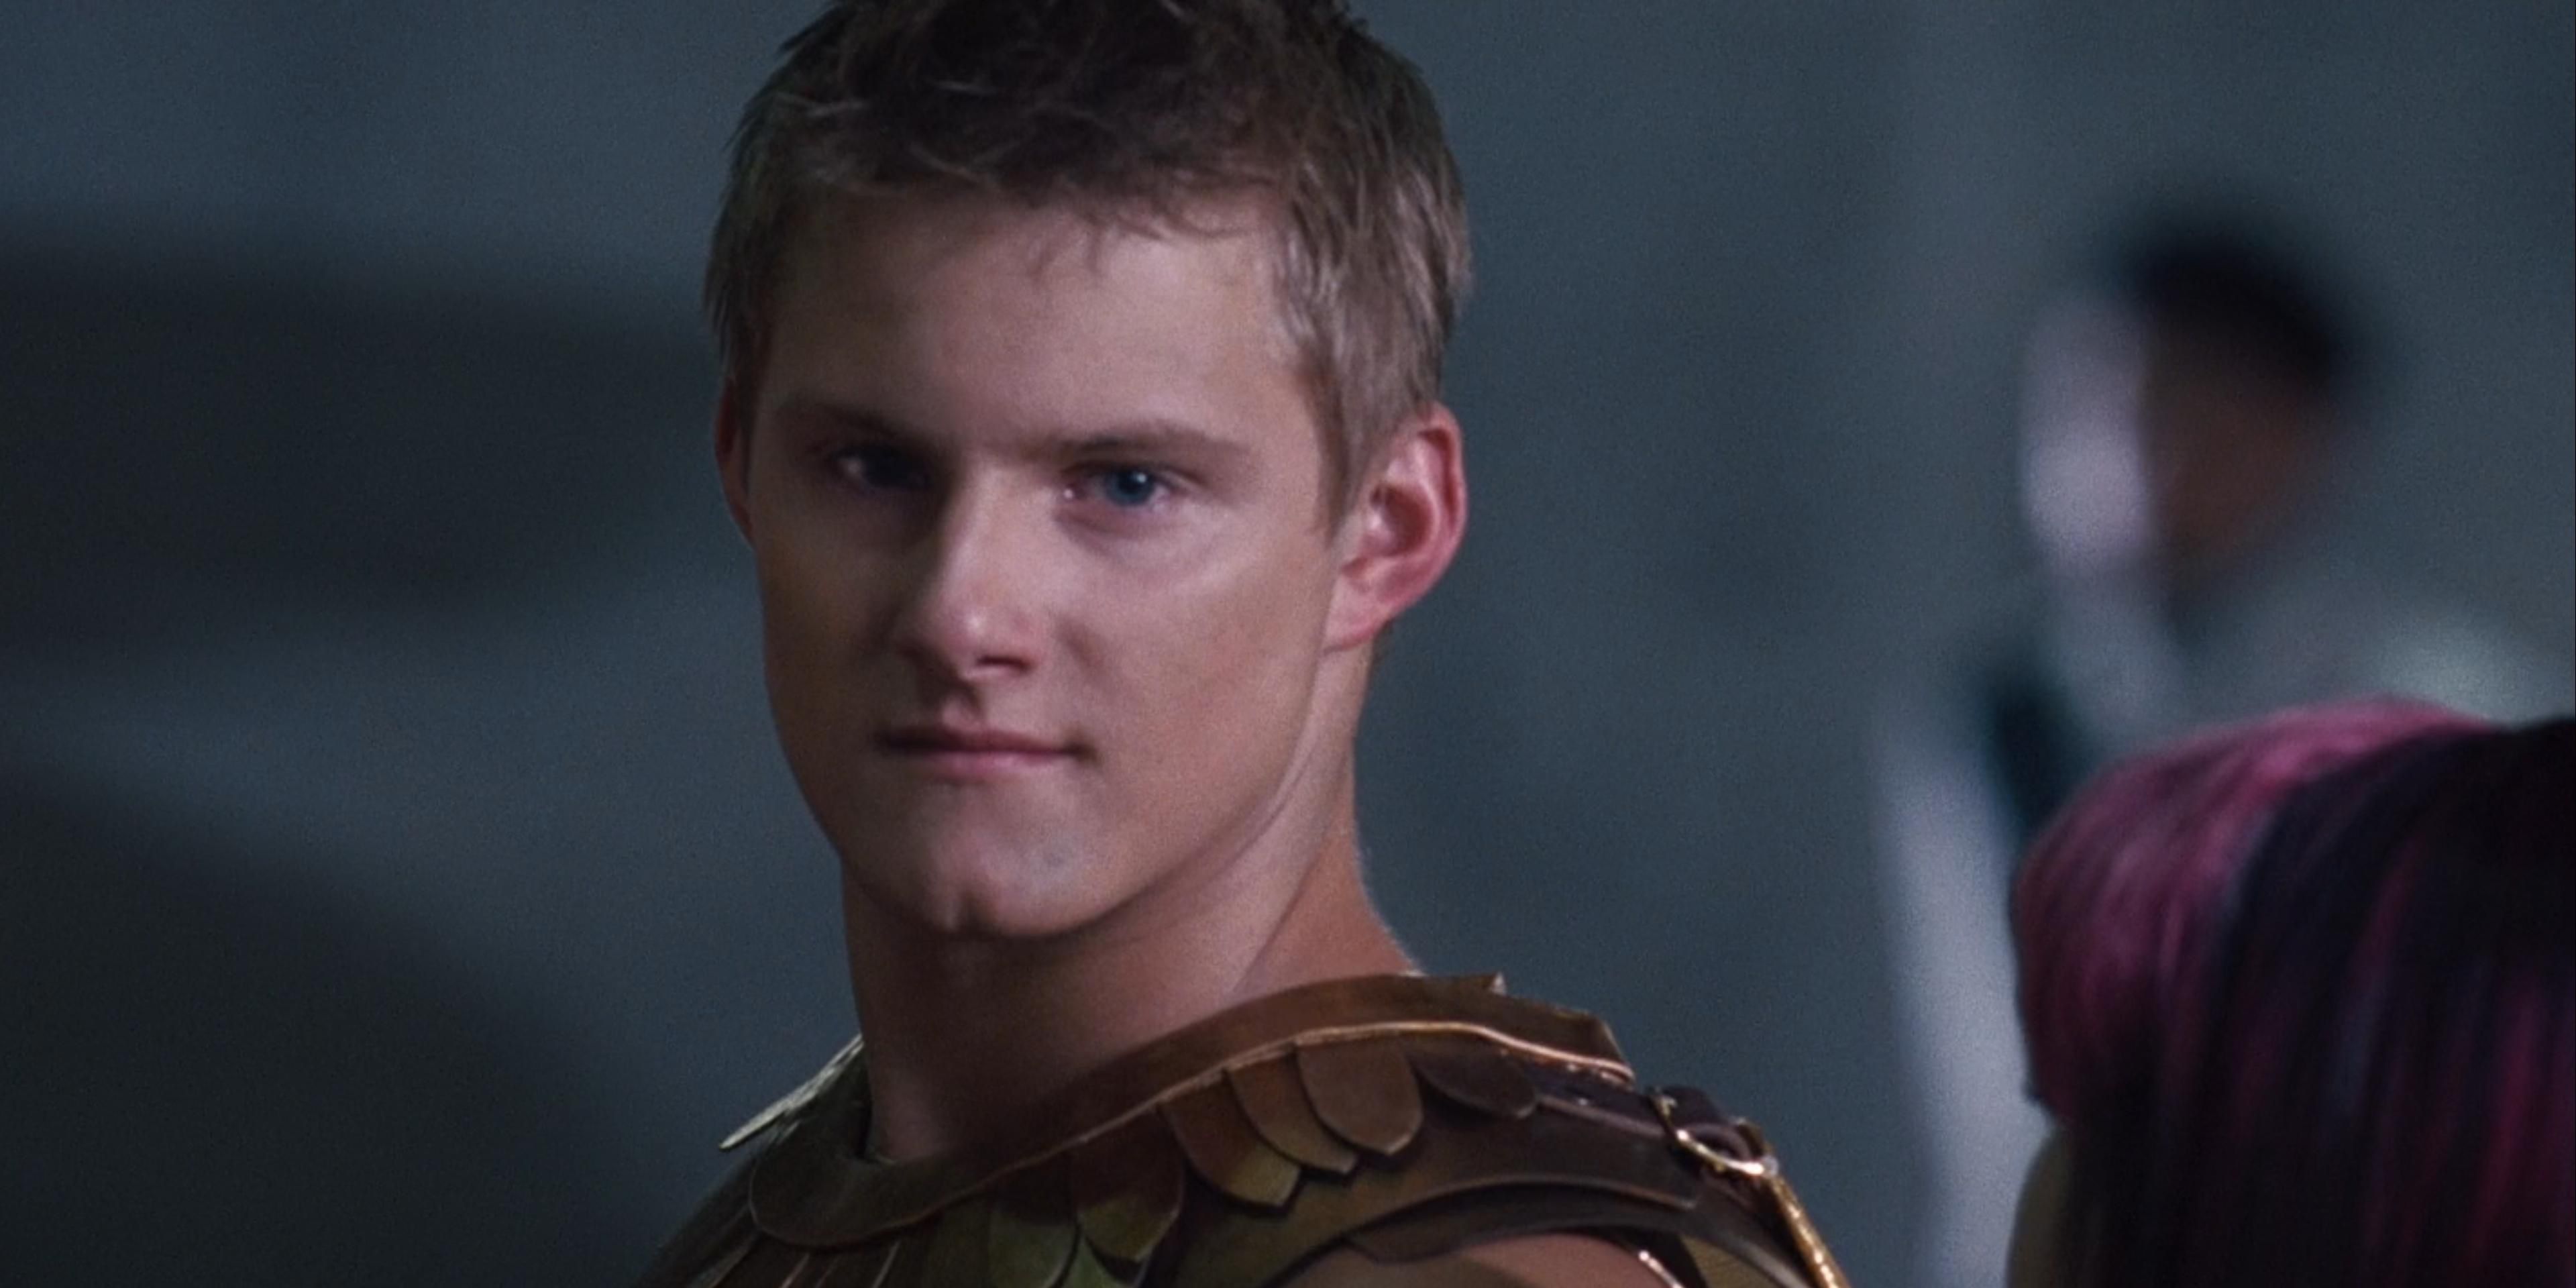 Cato of District 2 in The Hunger Games